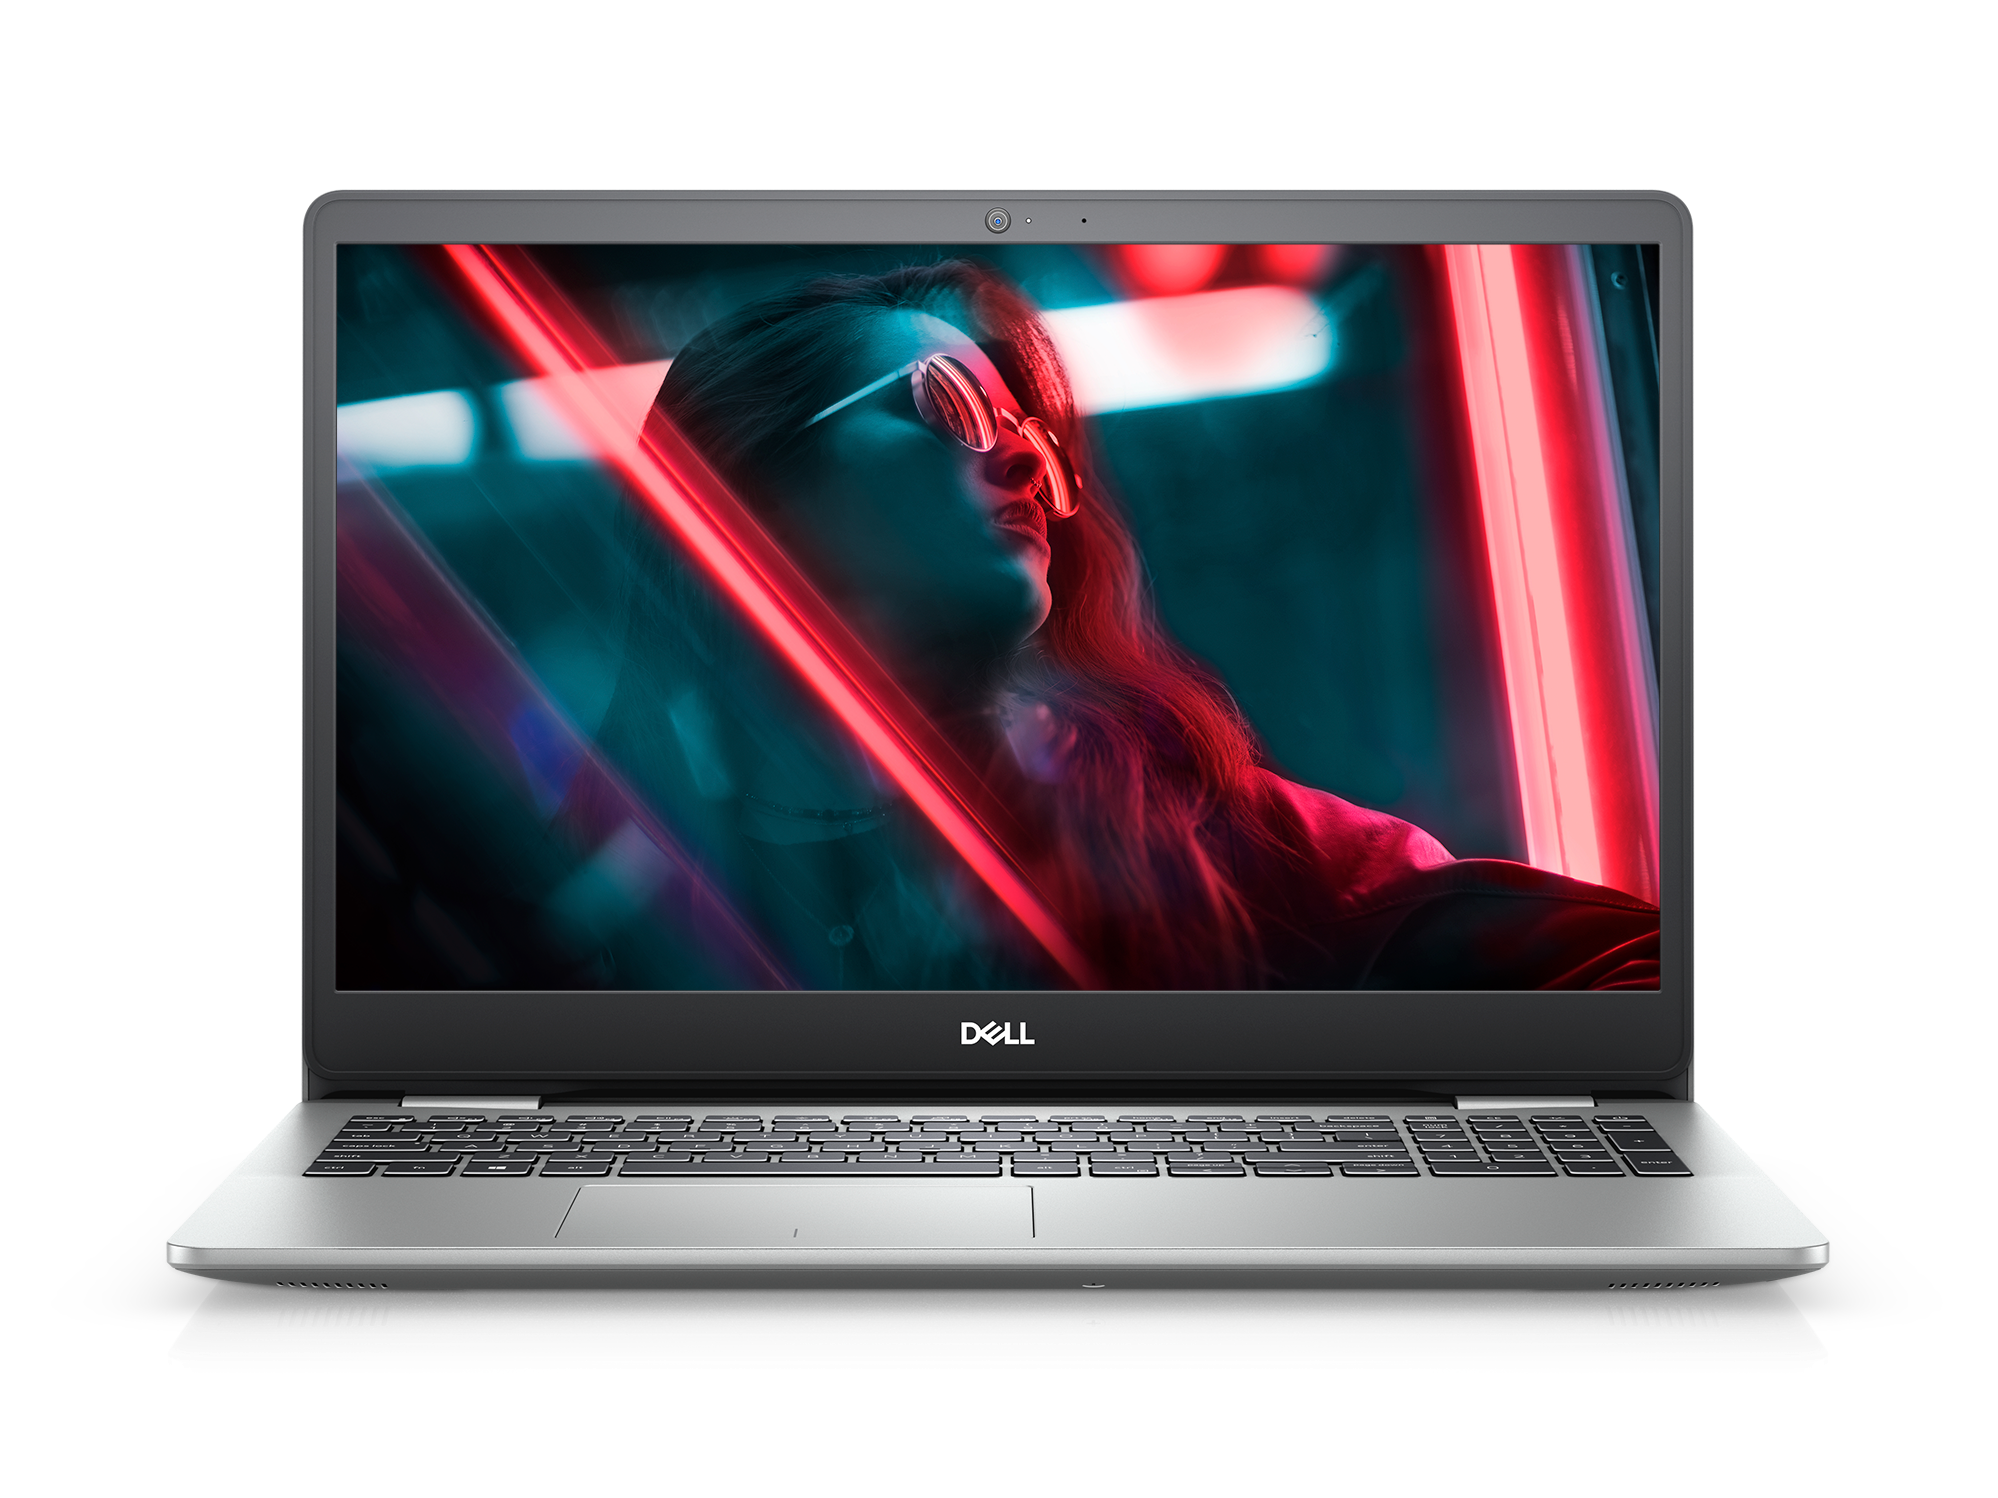 Vibra Shinkan mişcare  Affordable Dell Inspiron 13, 14, and 15 5000 series refreshed with Intel  Comet Lake Core i3-10110U up to the Core i7-10510U - NotebookCheck.net News